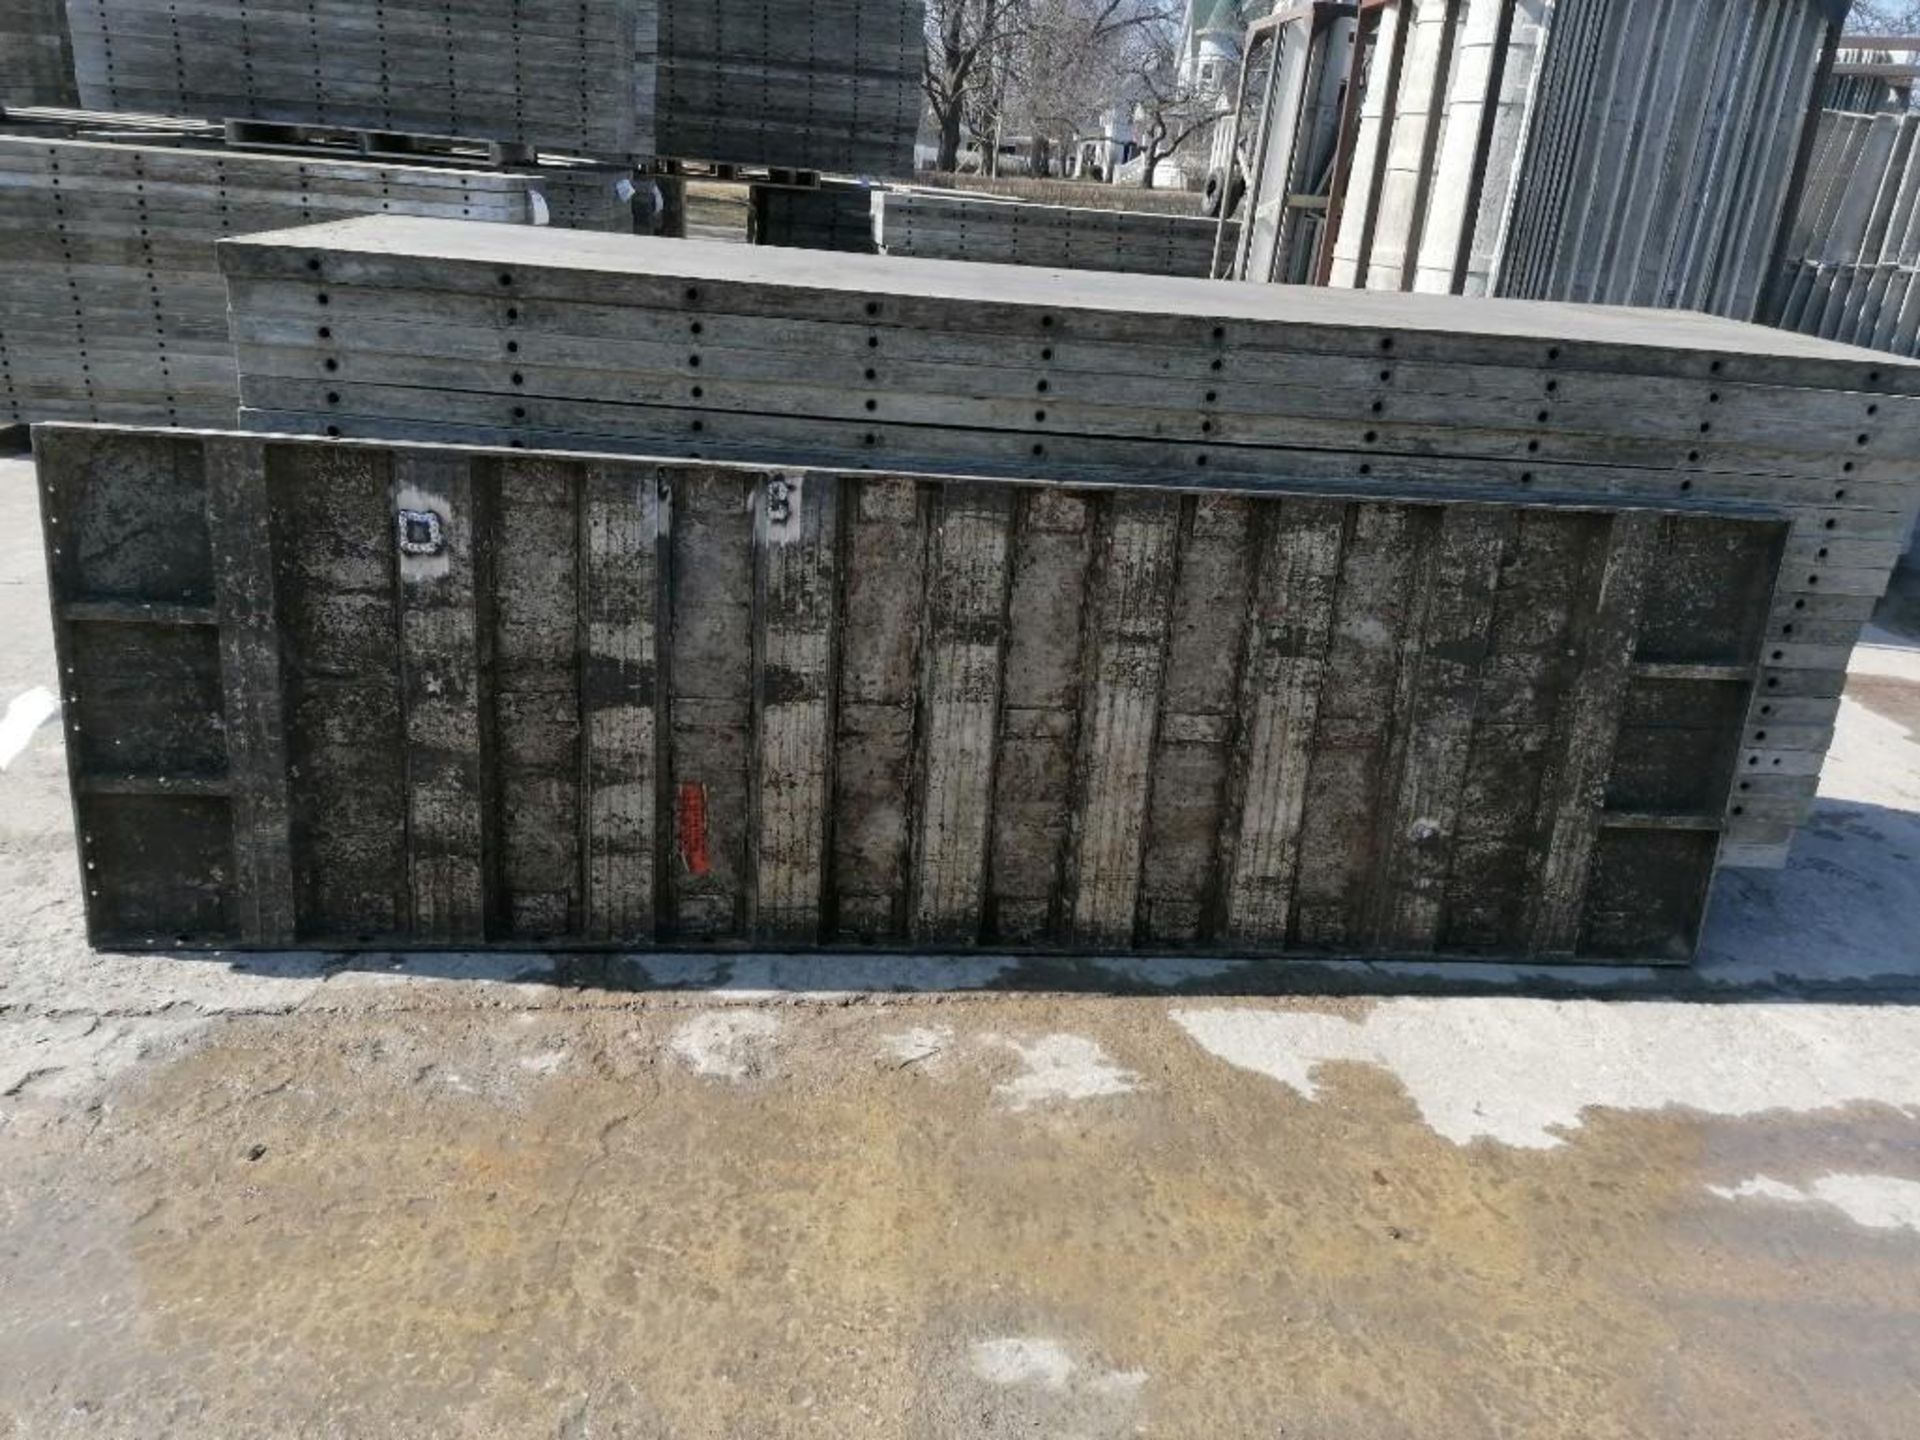 (20) 3' x 10' Wall-Ties Smooth Aluminum Concrete Forms 6-12 Hole Pattern. Located in Mt. Pleasant, - Image 7 of 8